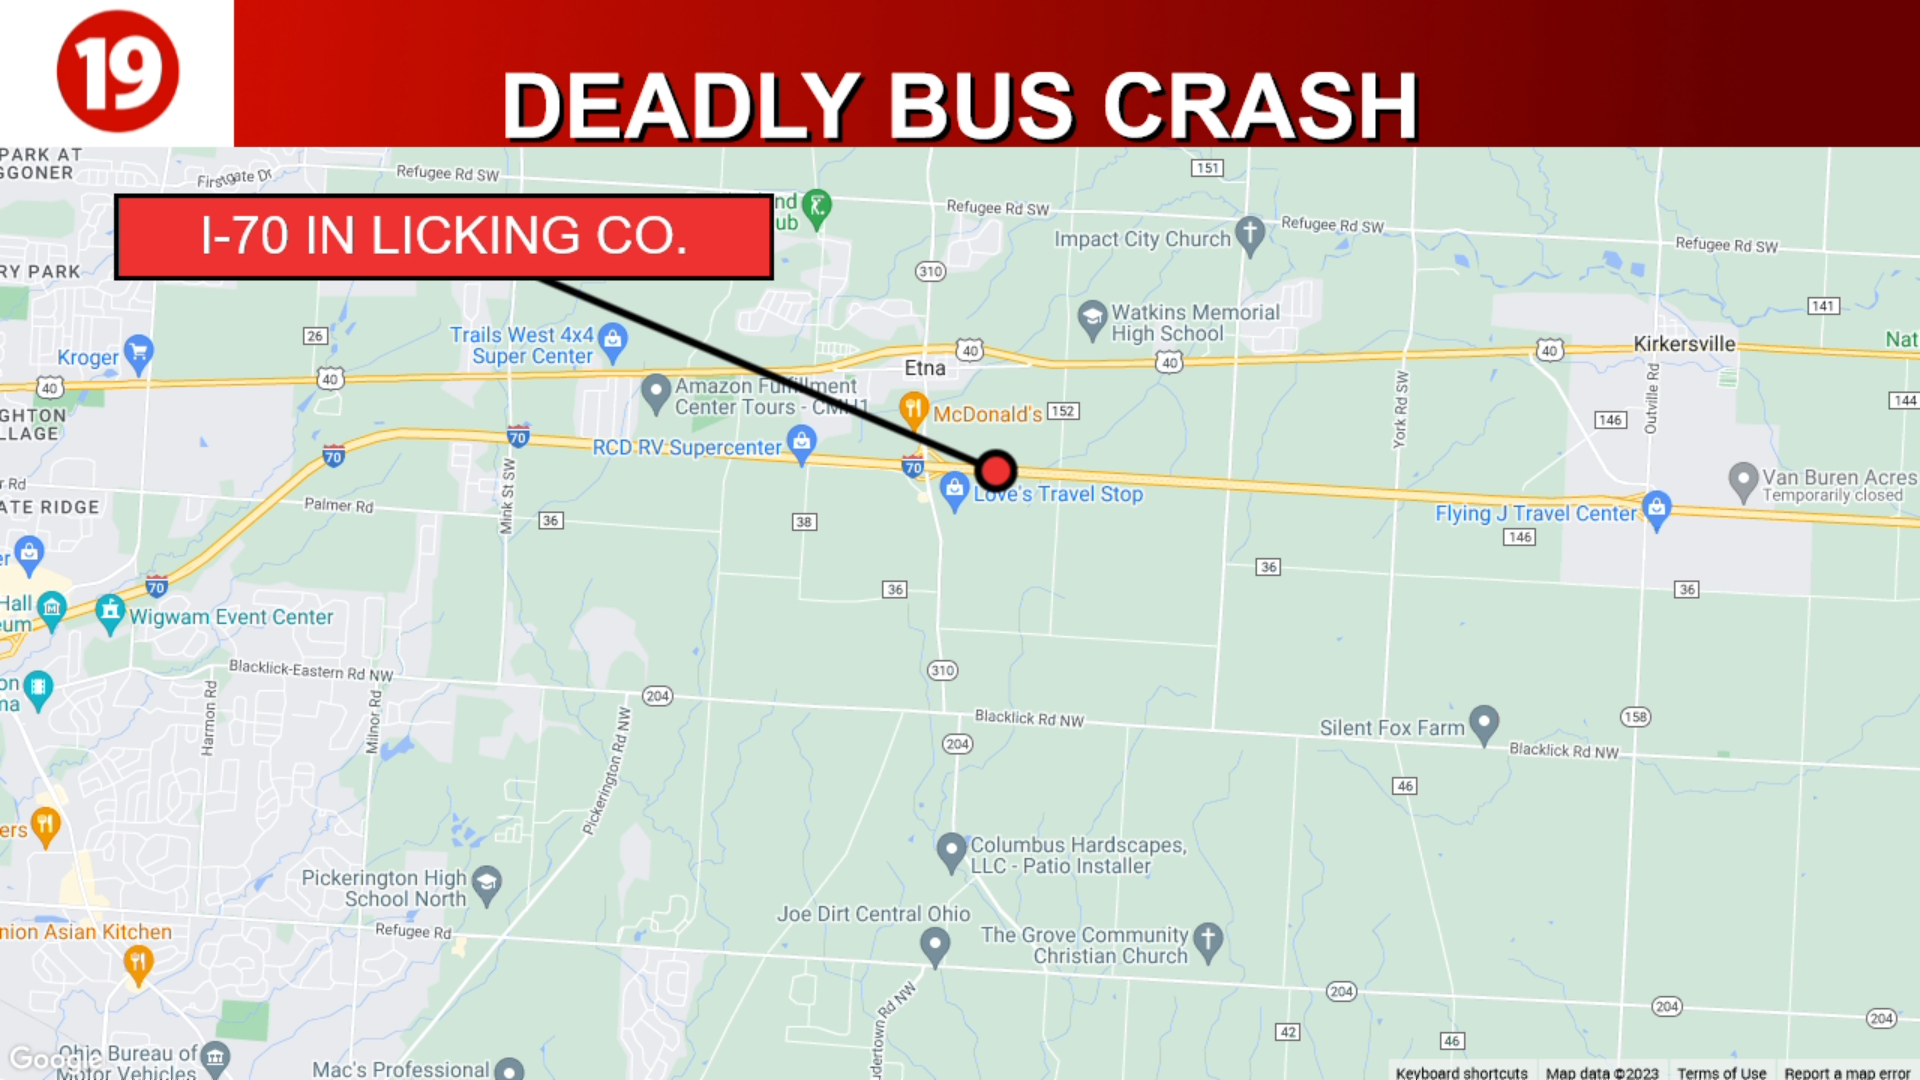 Bus involved in deadly Ohio crash had emergency exit-related violations:  Inspection report - ABC News